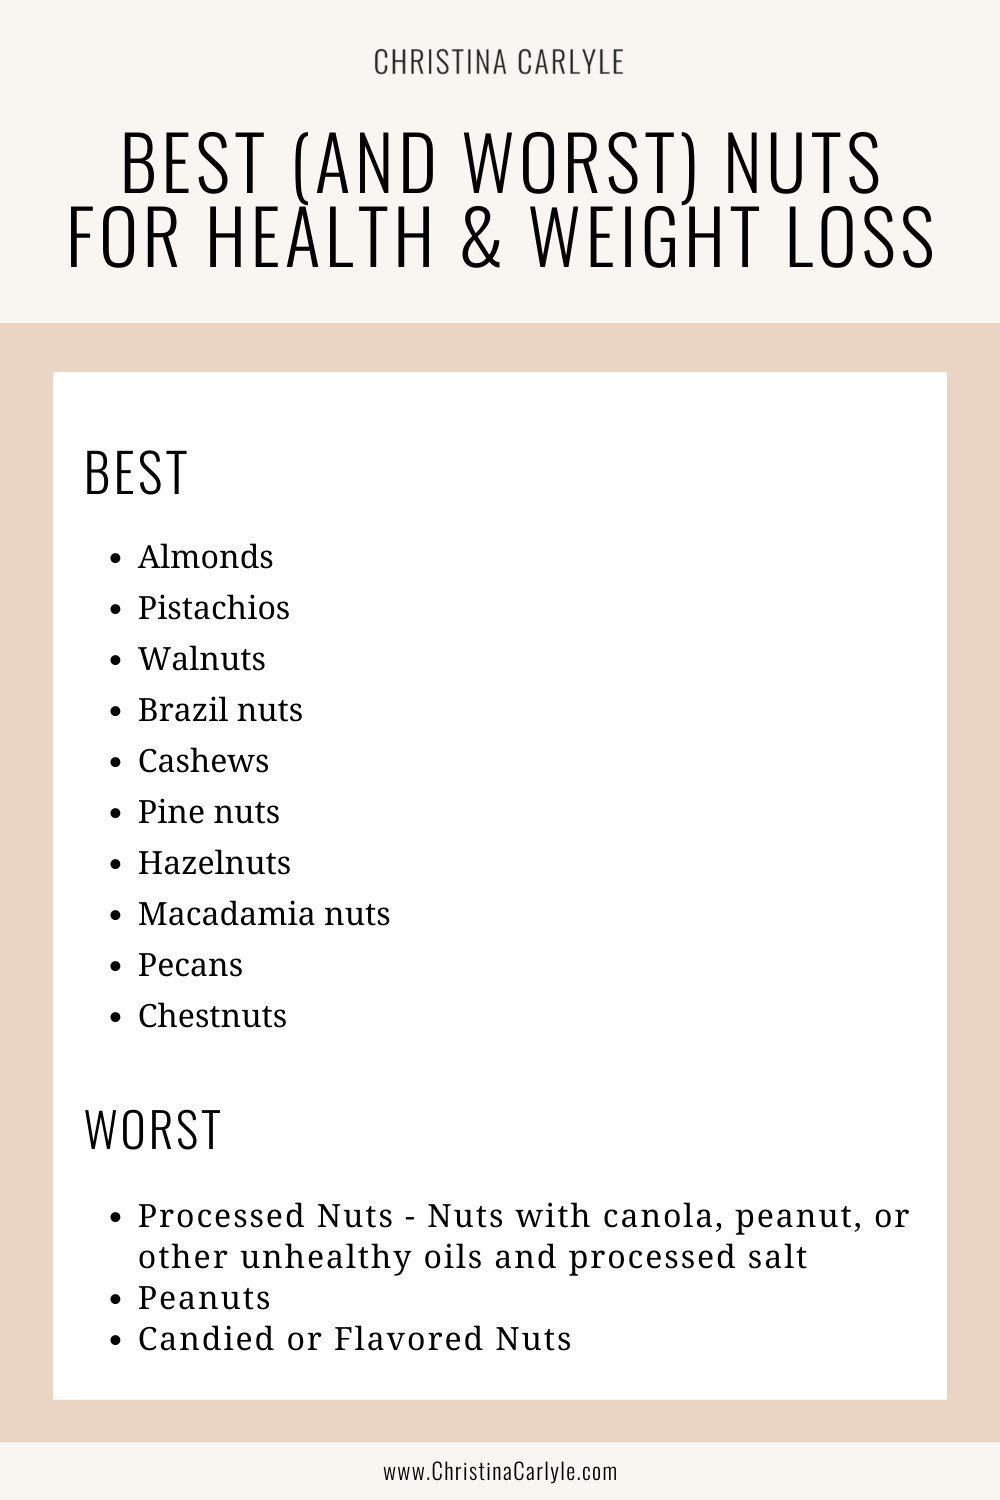 a list of the best and worst types of nuts and text that says BEST (AND WORST) NUTS FOR HEALTH & WEIGHT LOSS